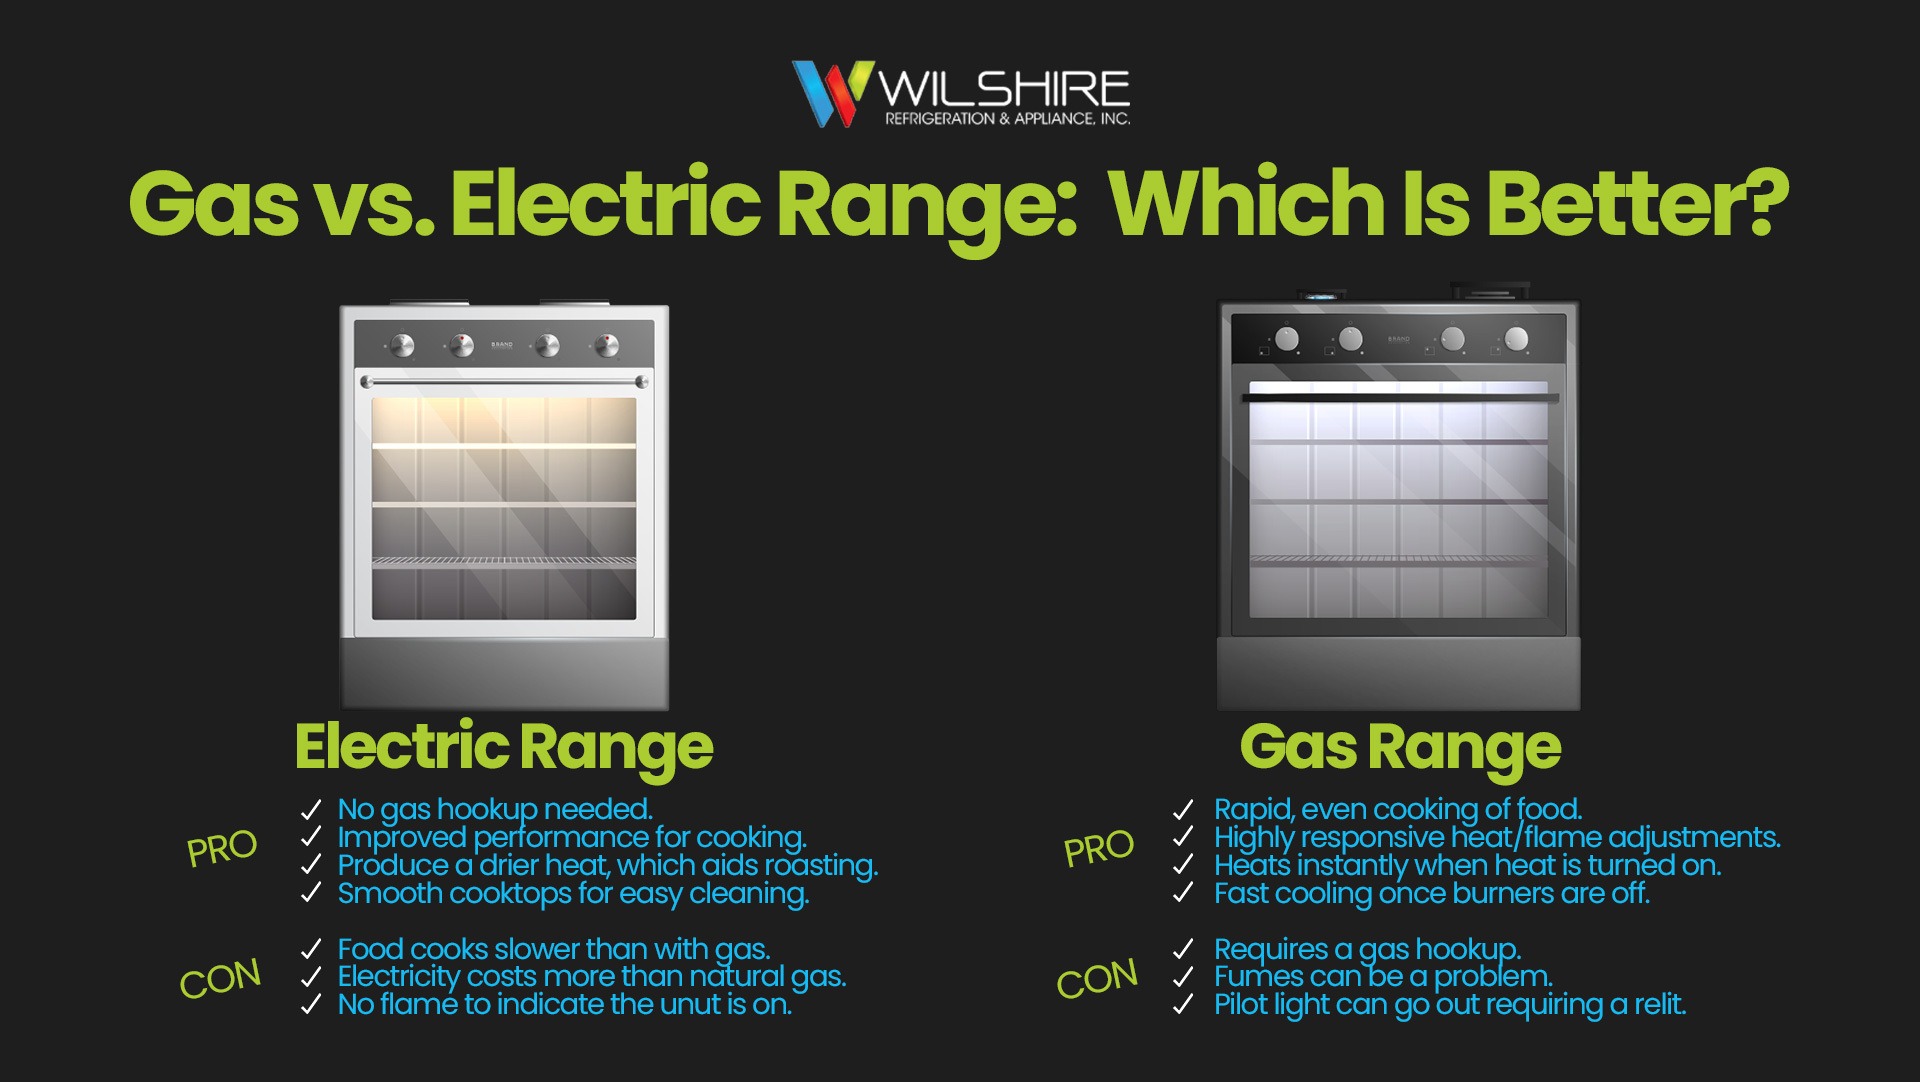 Gas vs. Electric Stoves: Which is Better?